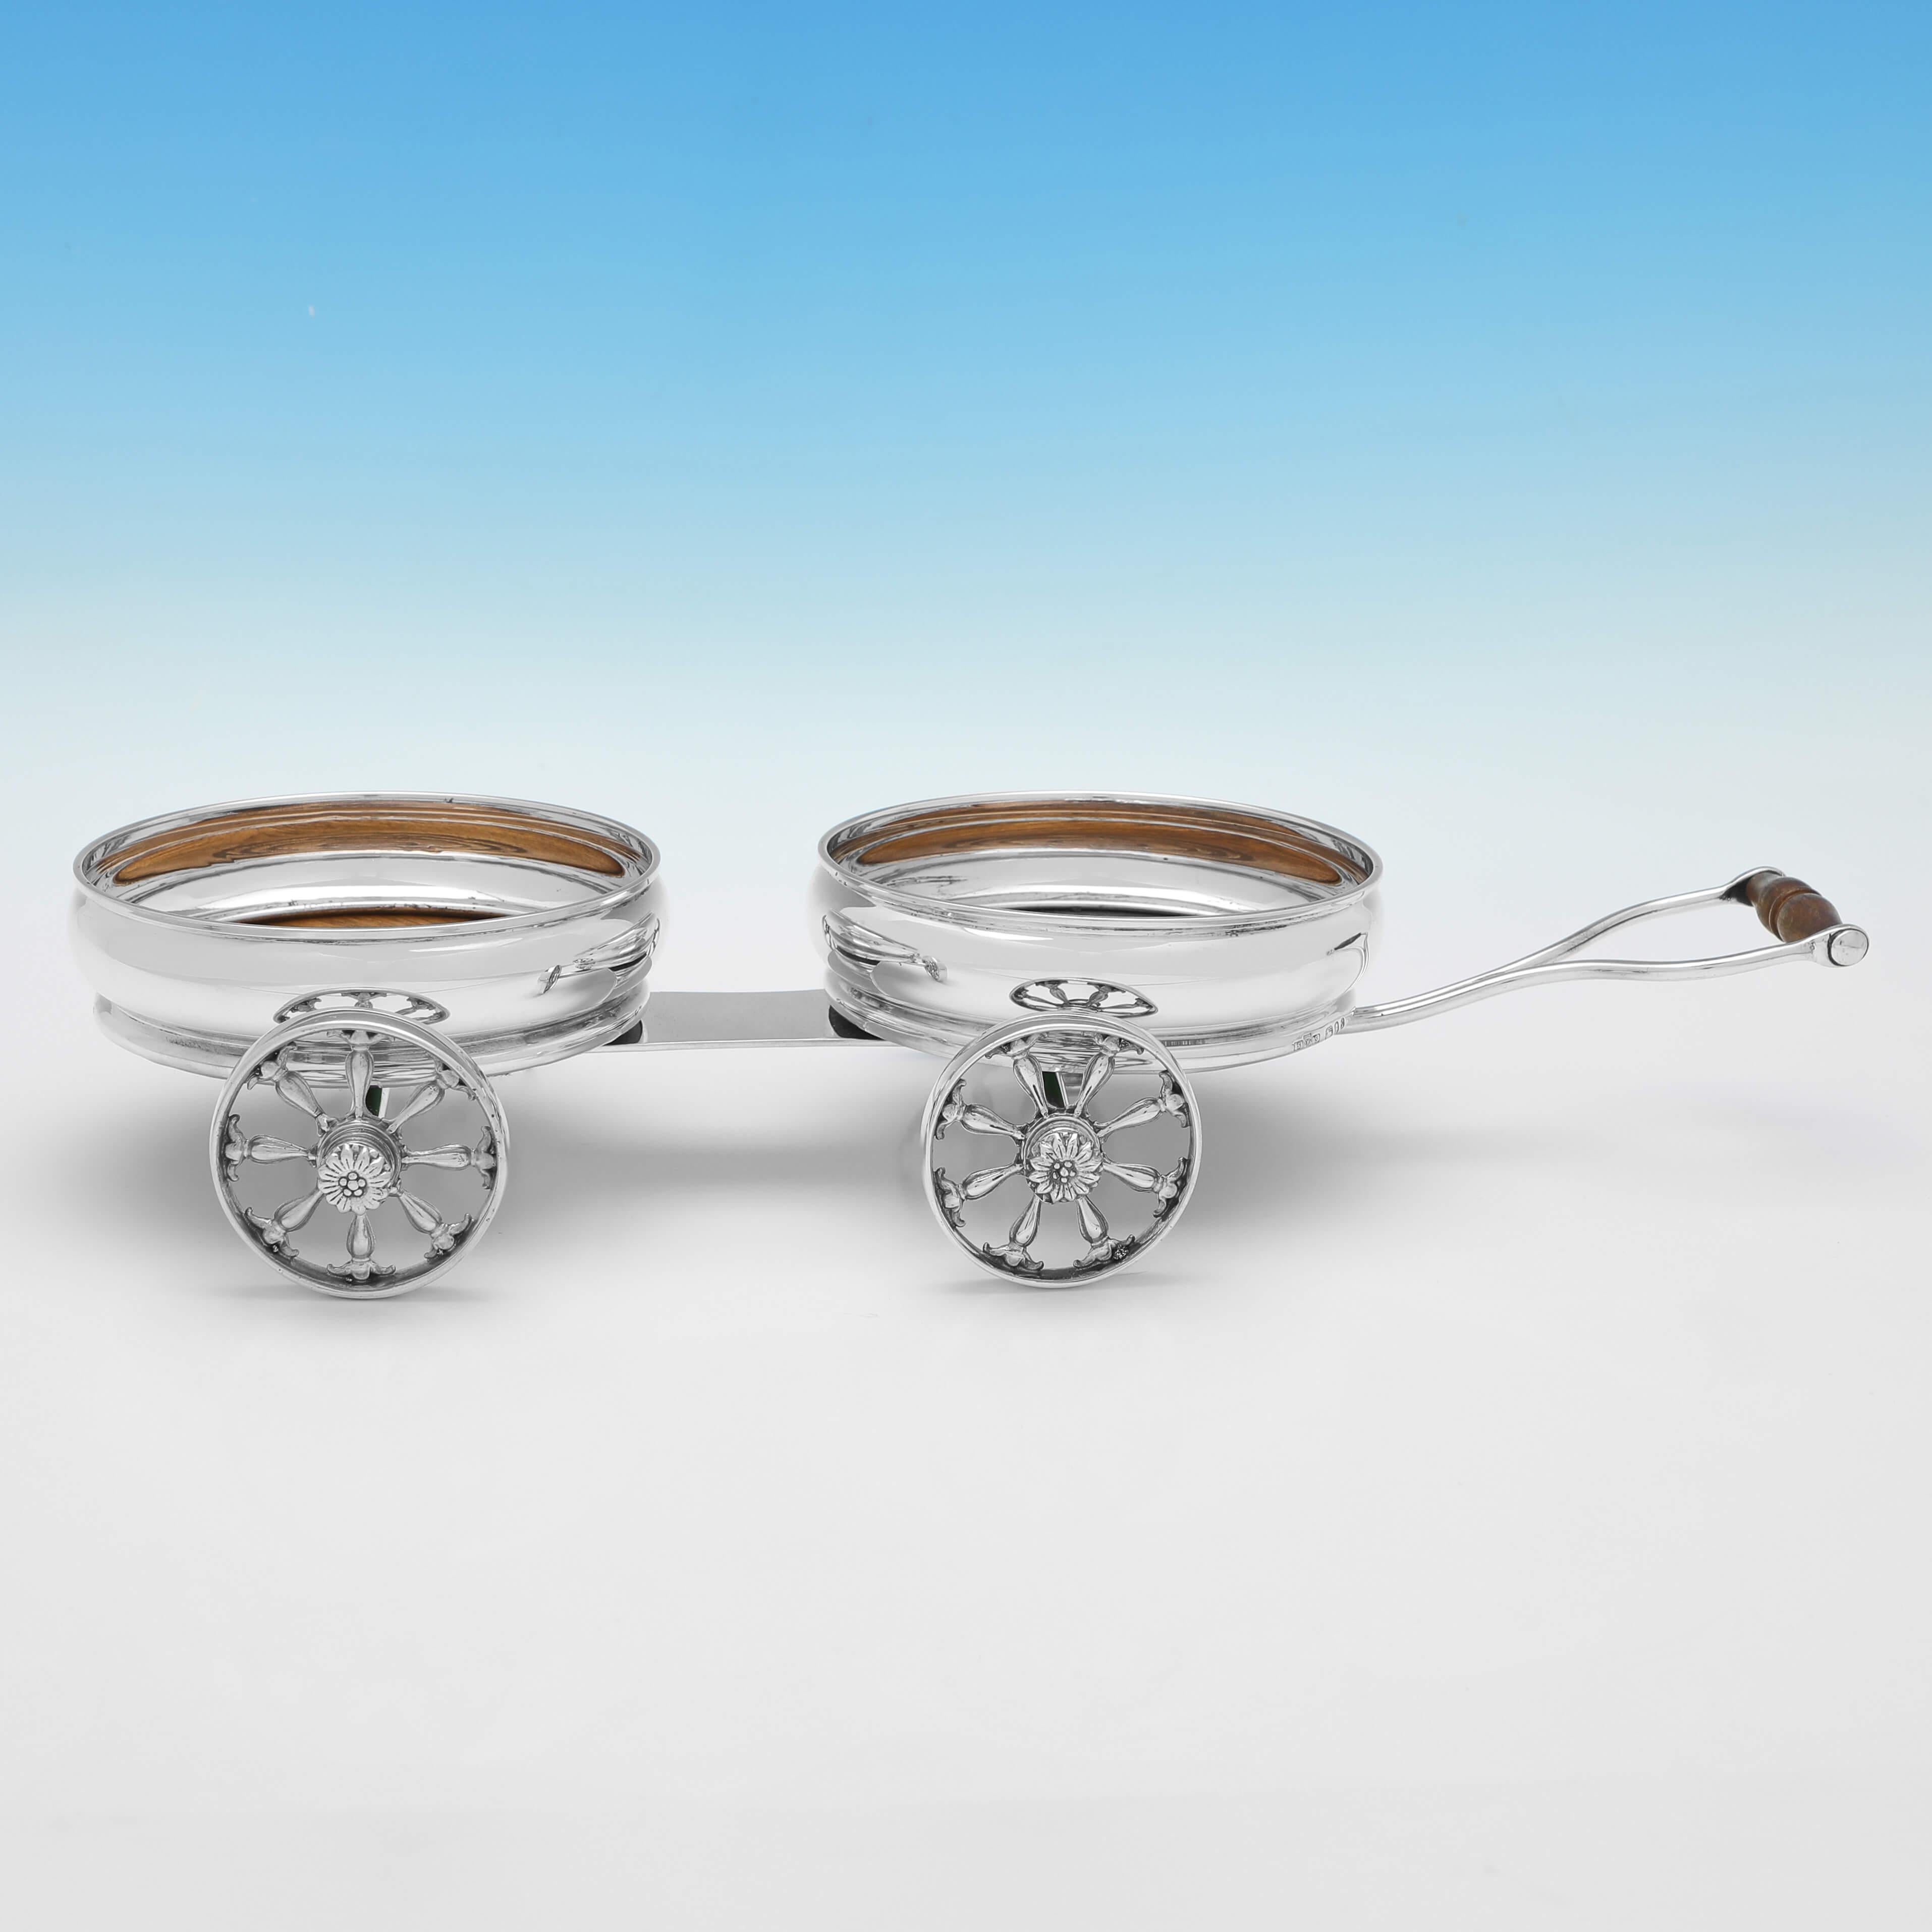 Hallmarked in London in 1970 by S. M. Shaw, this very stylish and rare, Sterling Silver Double Wine Coaster Trolley, is plain in design, with turned wooden bases to the coasters. 

The wine coaster trolley measures 3